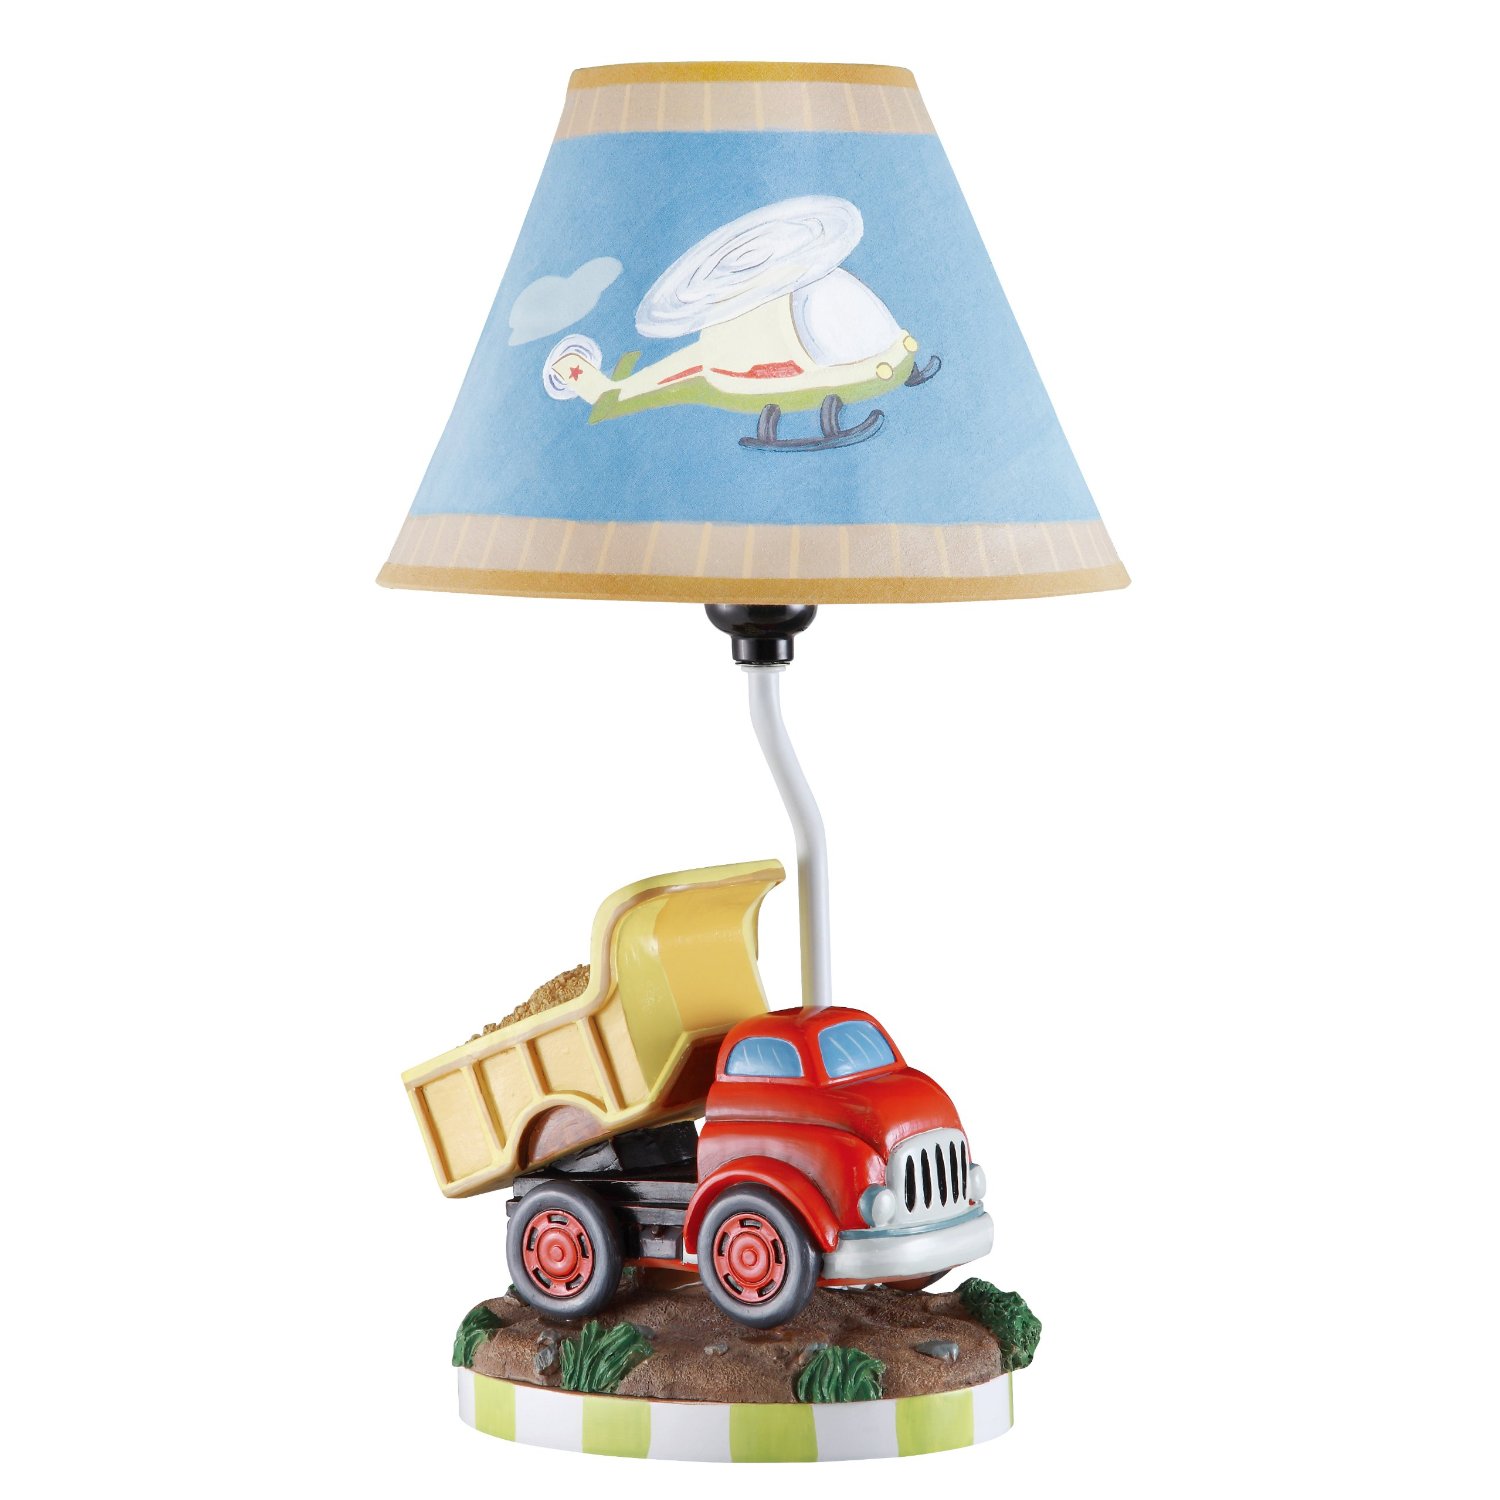 Kids Room Lamps cute lamps for kids rooms lighting FDJIBZY